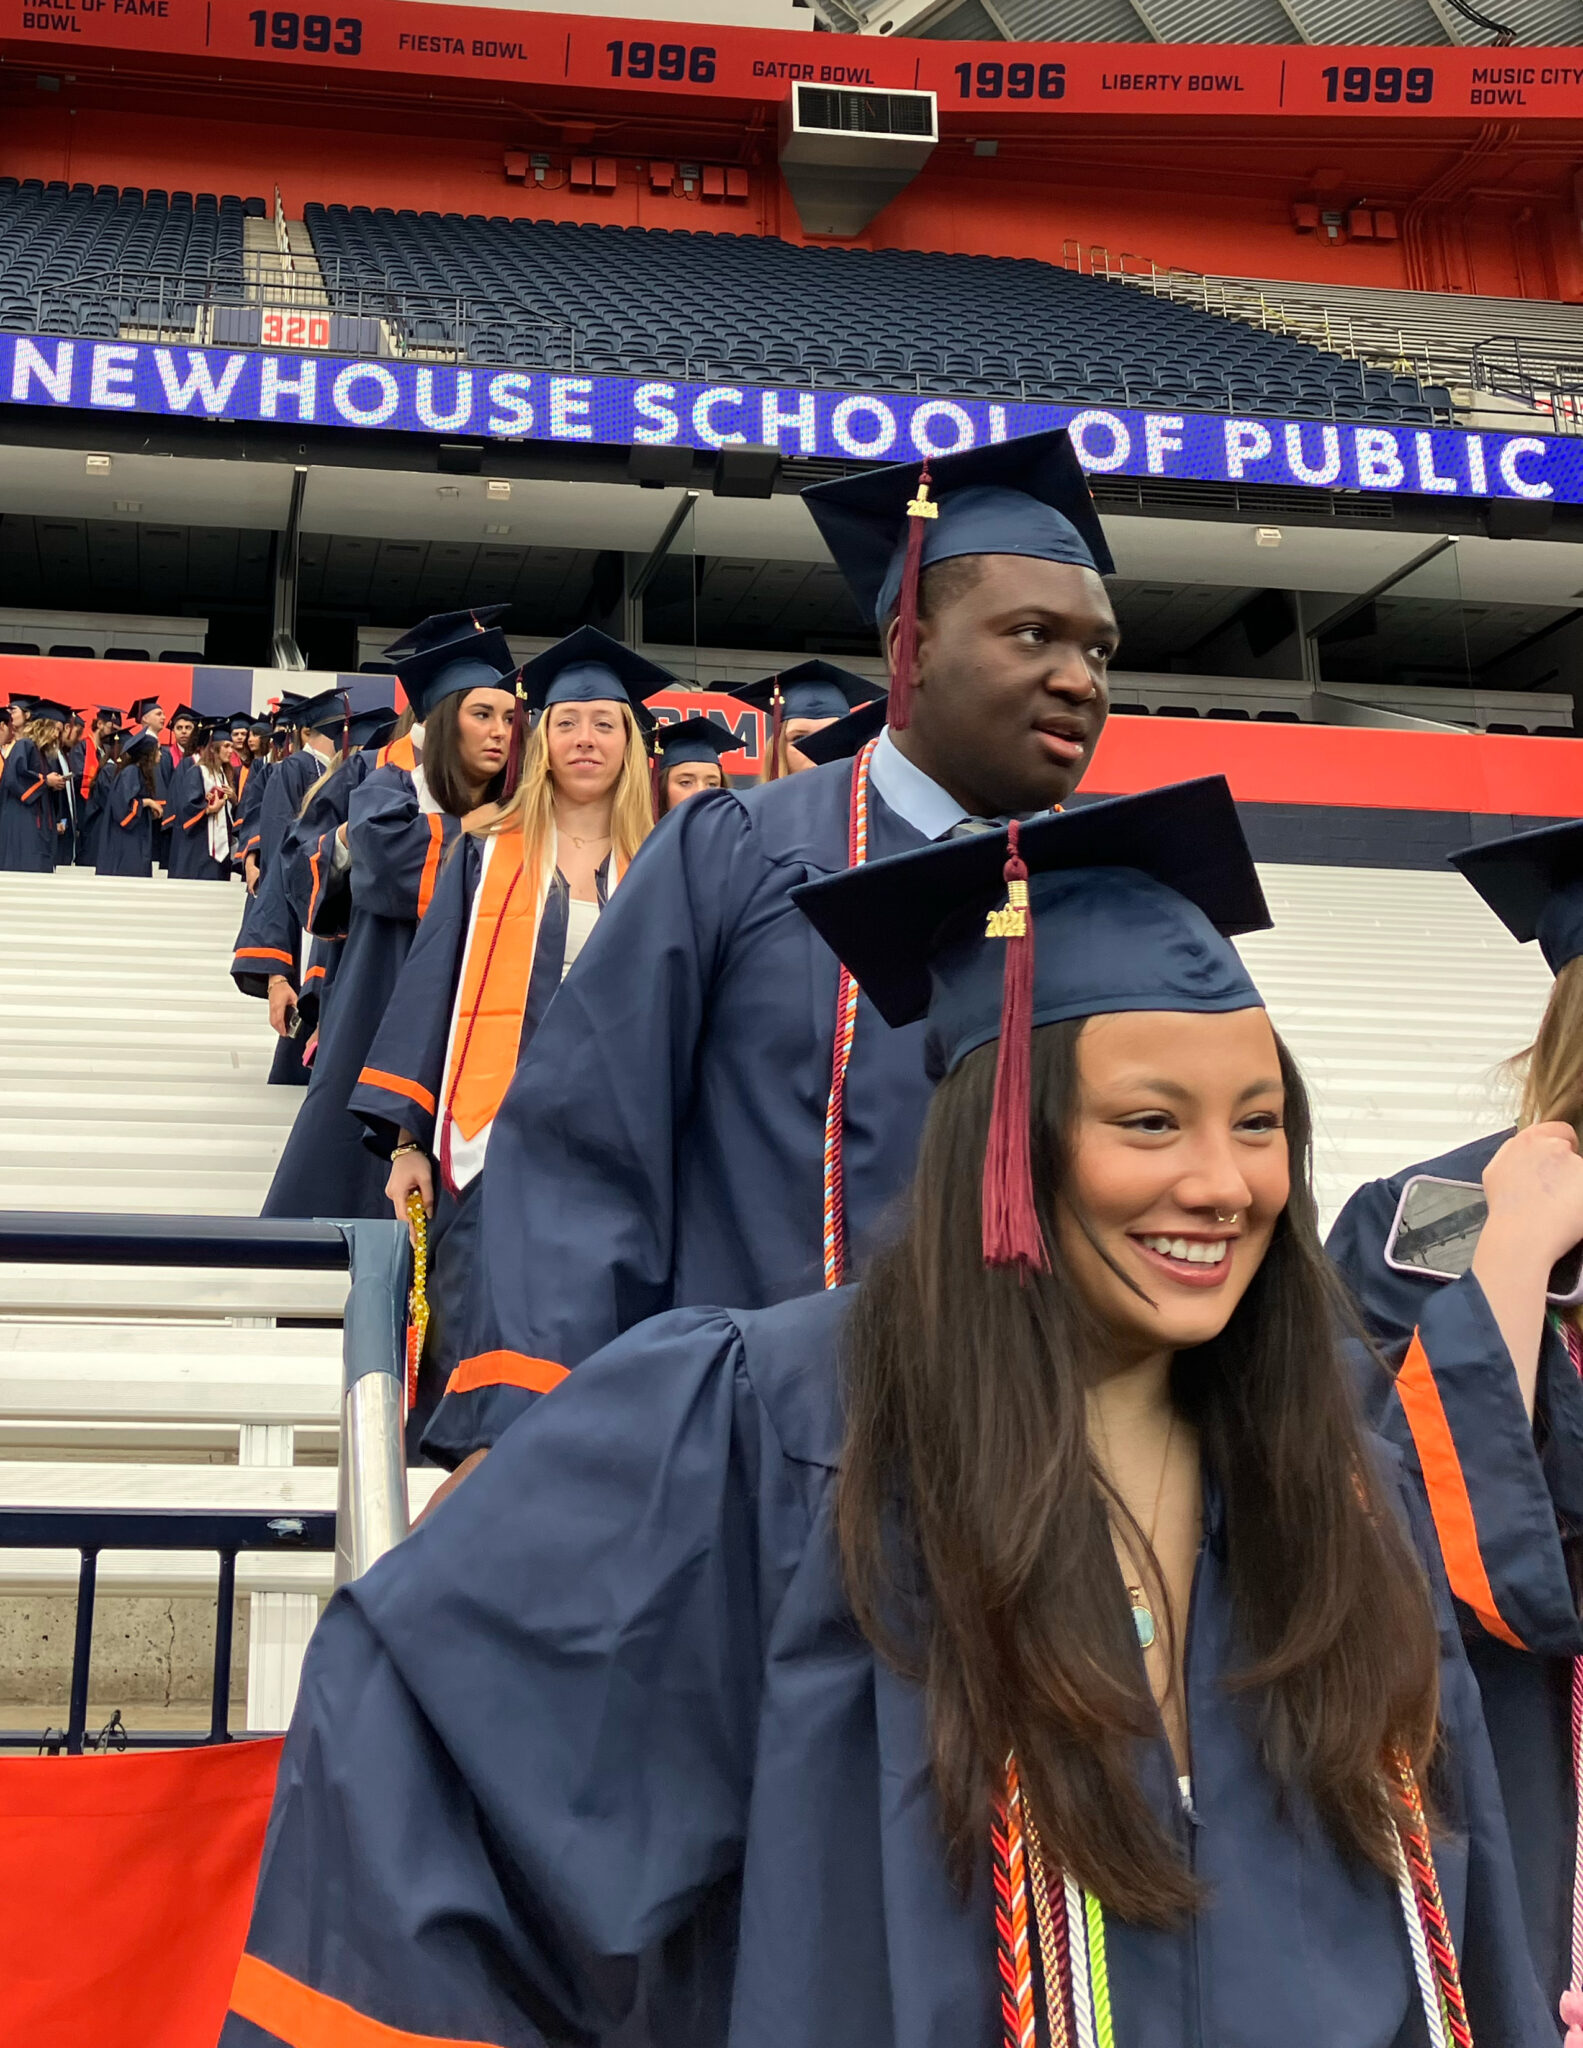 Students dressed in graduation caps and gowns walk down a flight of stairs